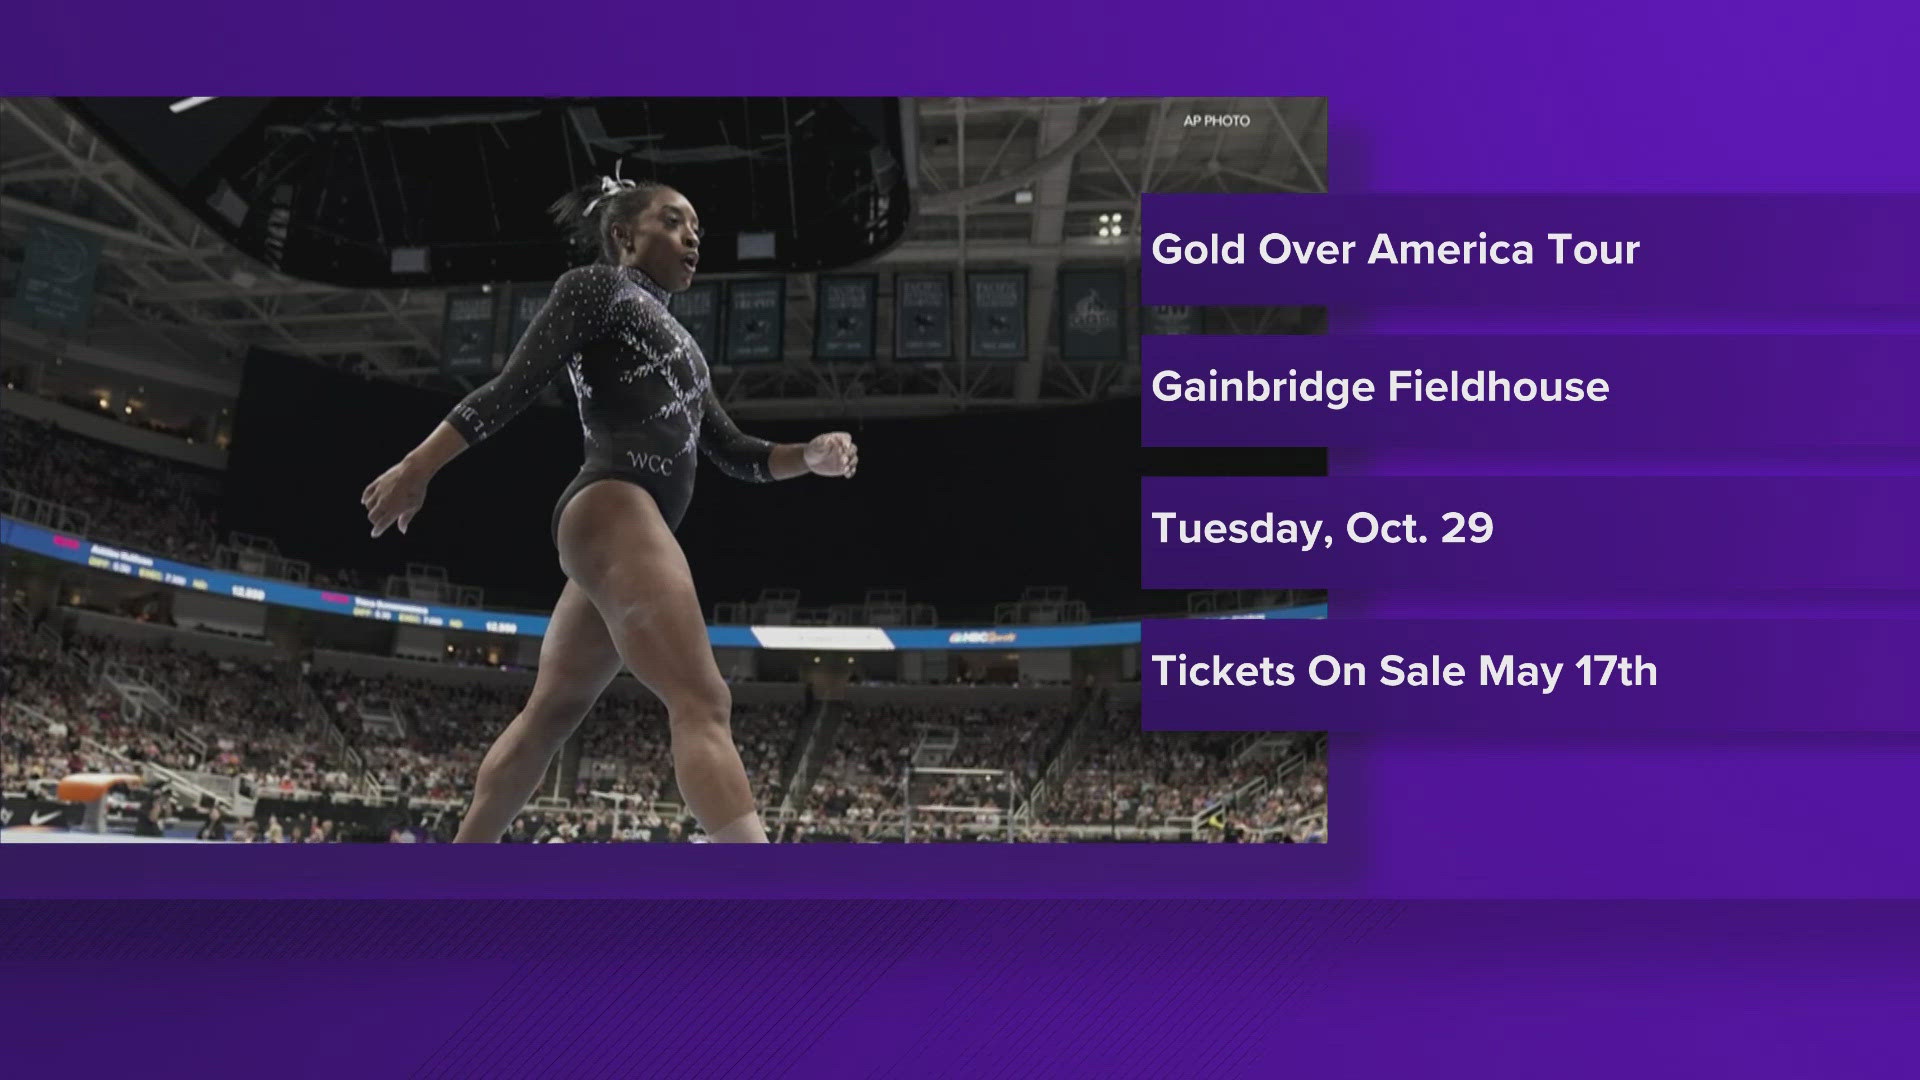 The event is scheduled for Tuesday, Oct. 29 at Gainbridge Fieldhouse. 
Tickets go on sale at 10 a.m. Friday, May 17th.